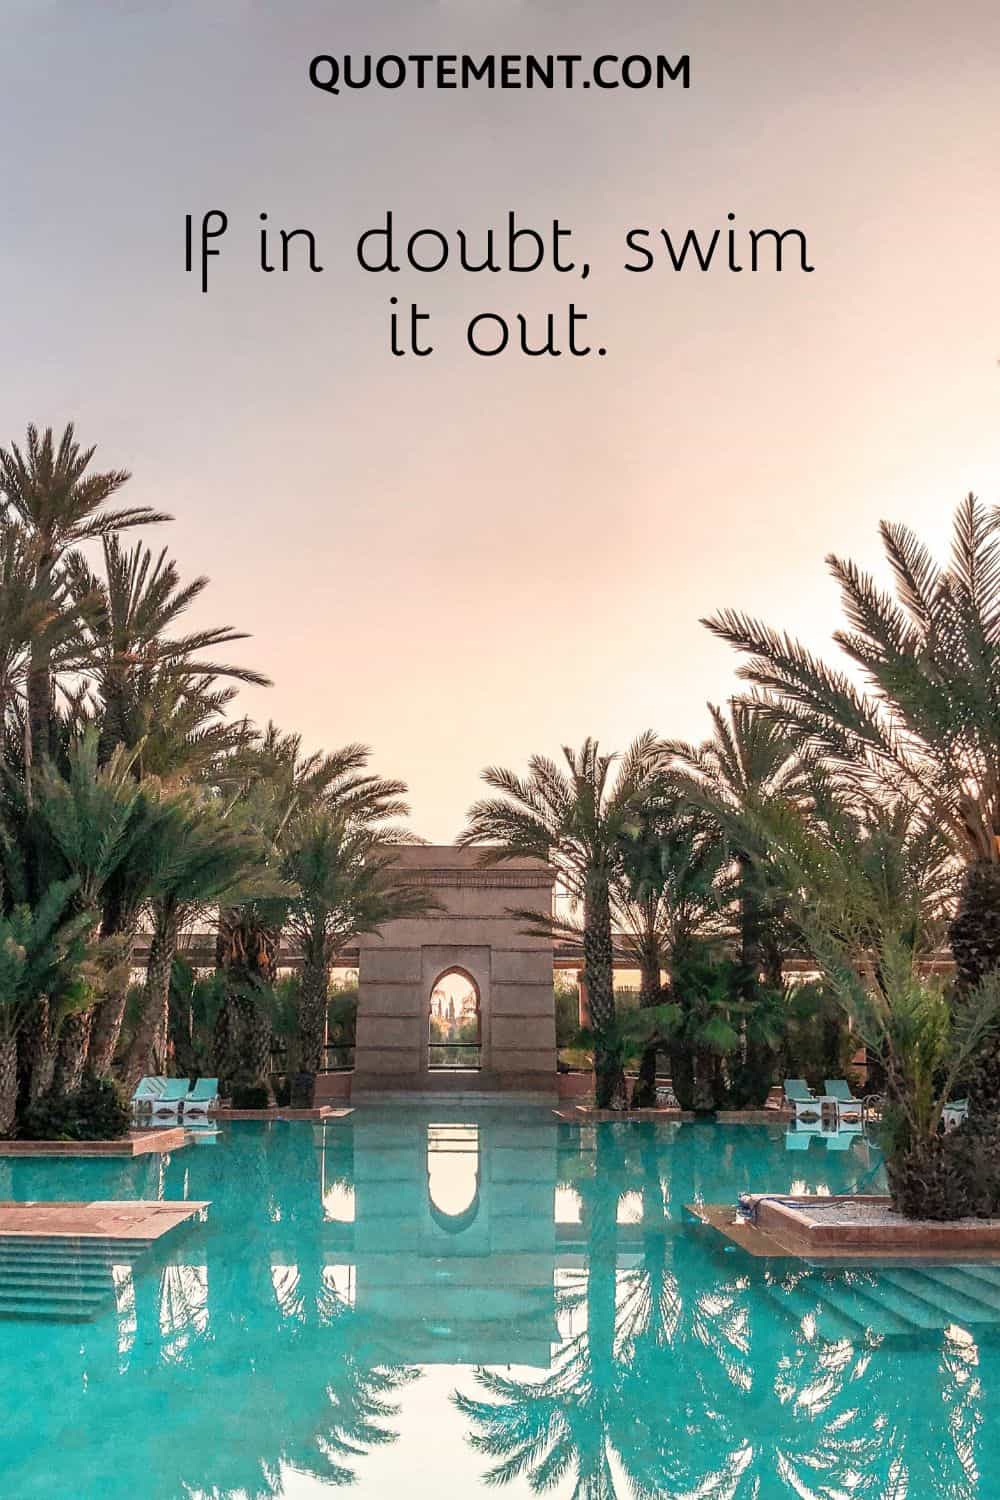 If in doubt, swim it out.